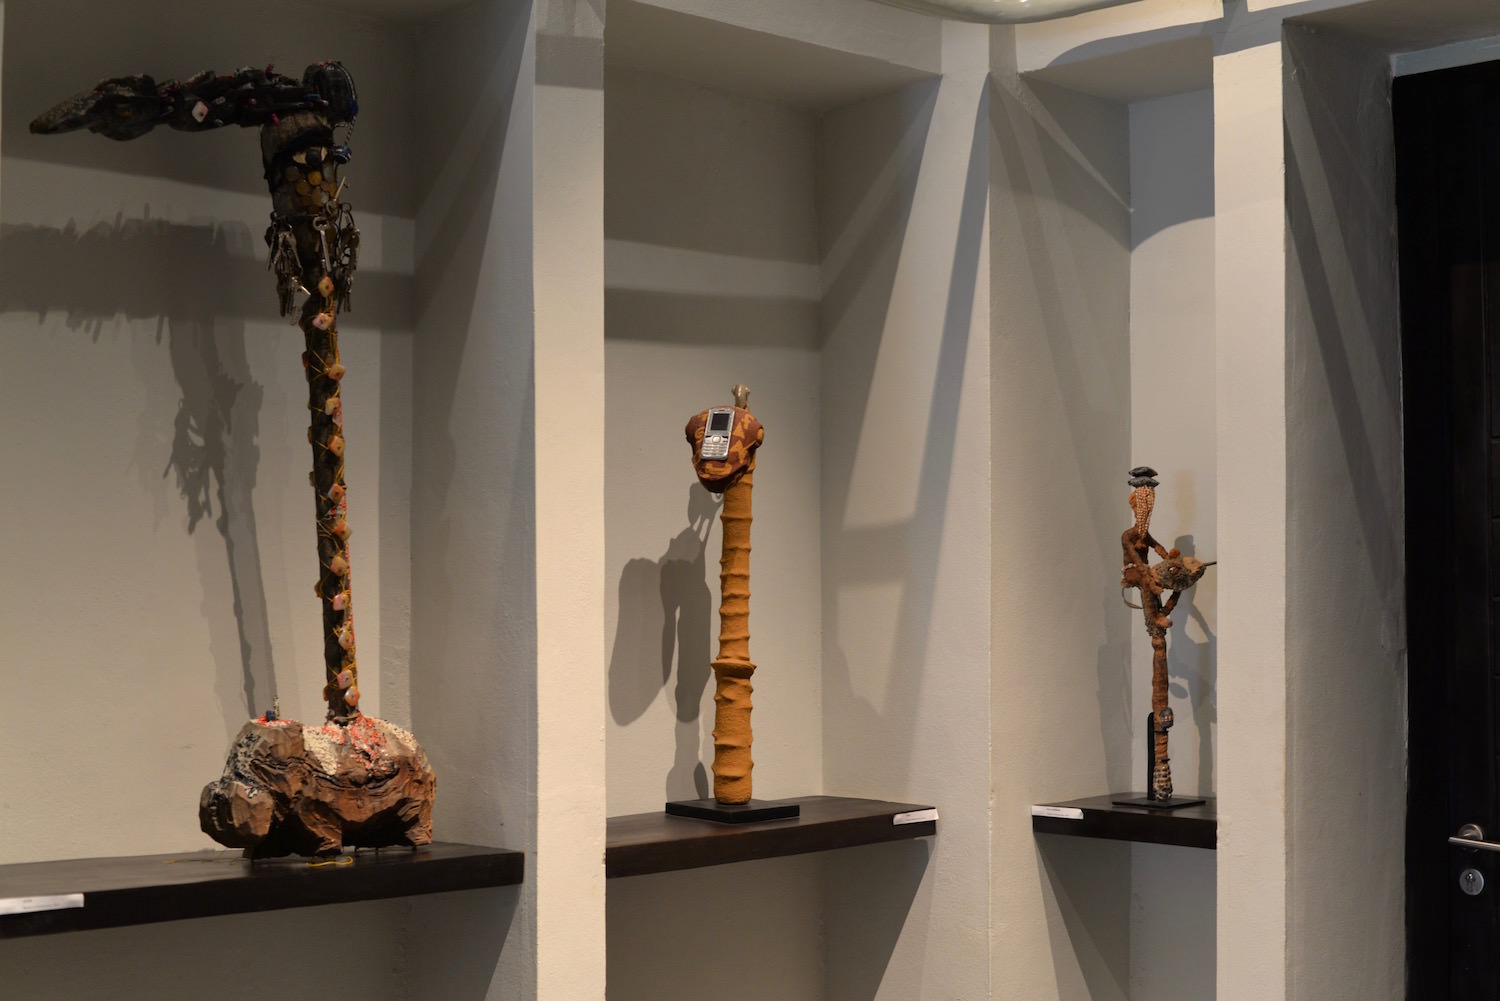 Cotonou: Benin Museum Receives Over 20 Looted Artifacts from France